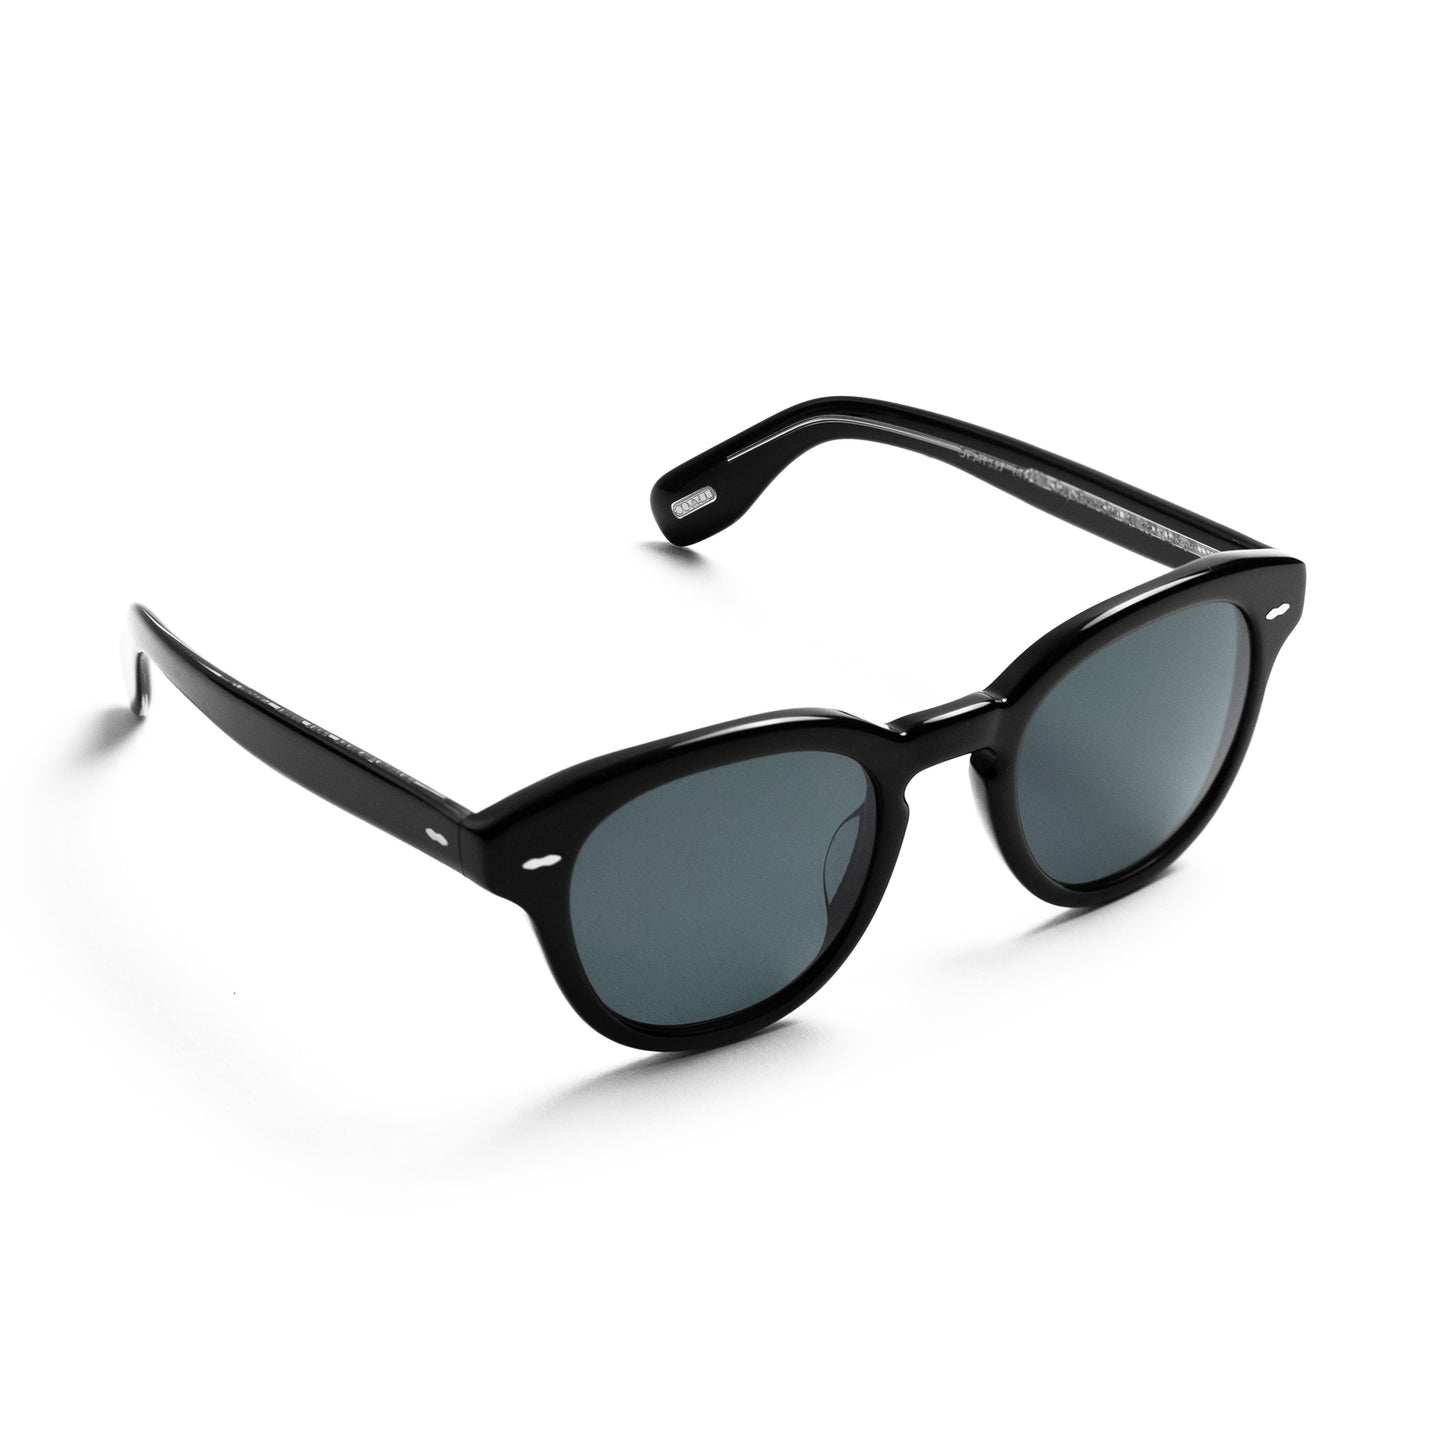 Oliver Peoples x Cary Grant Sunglasses